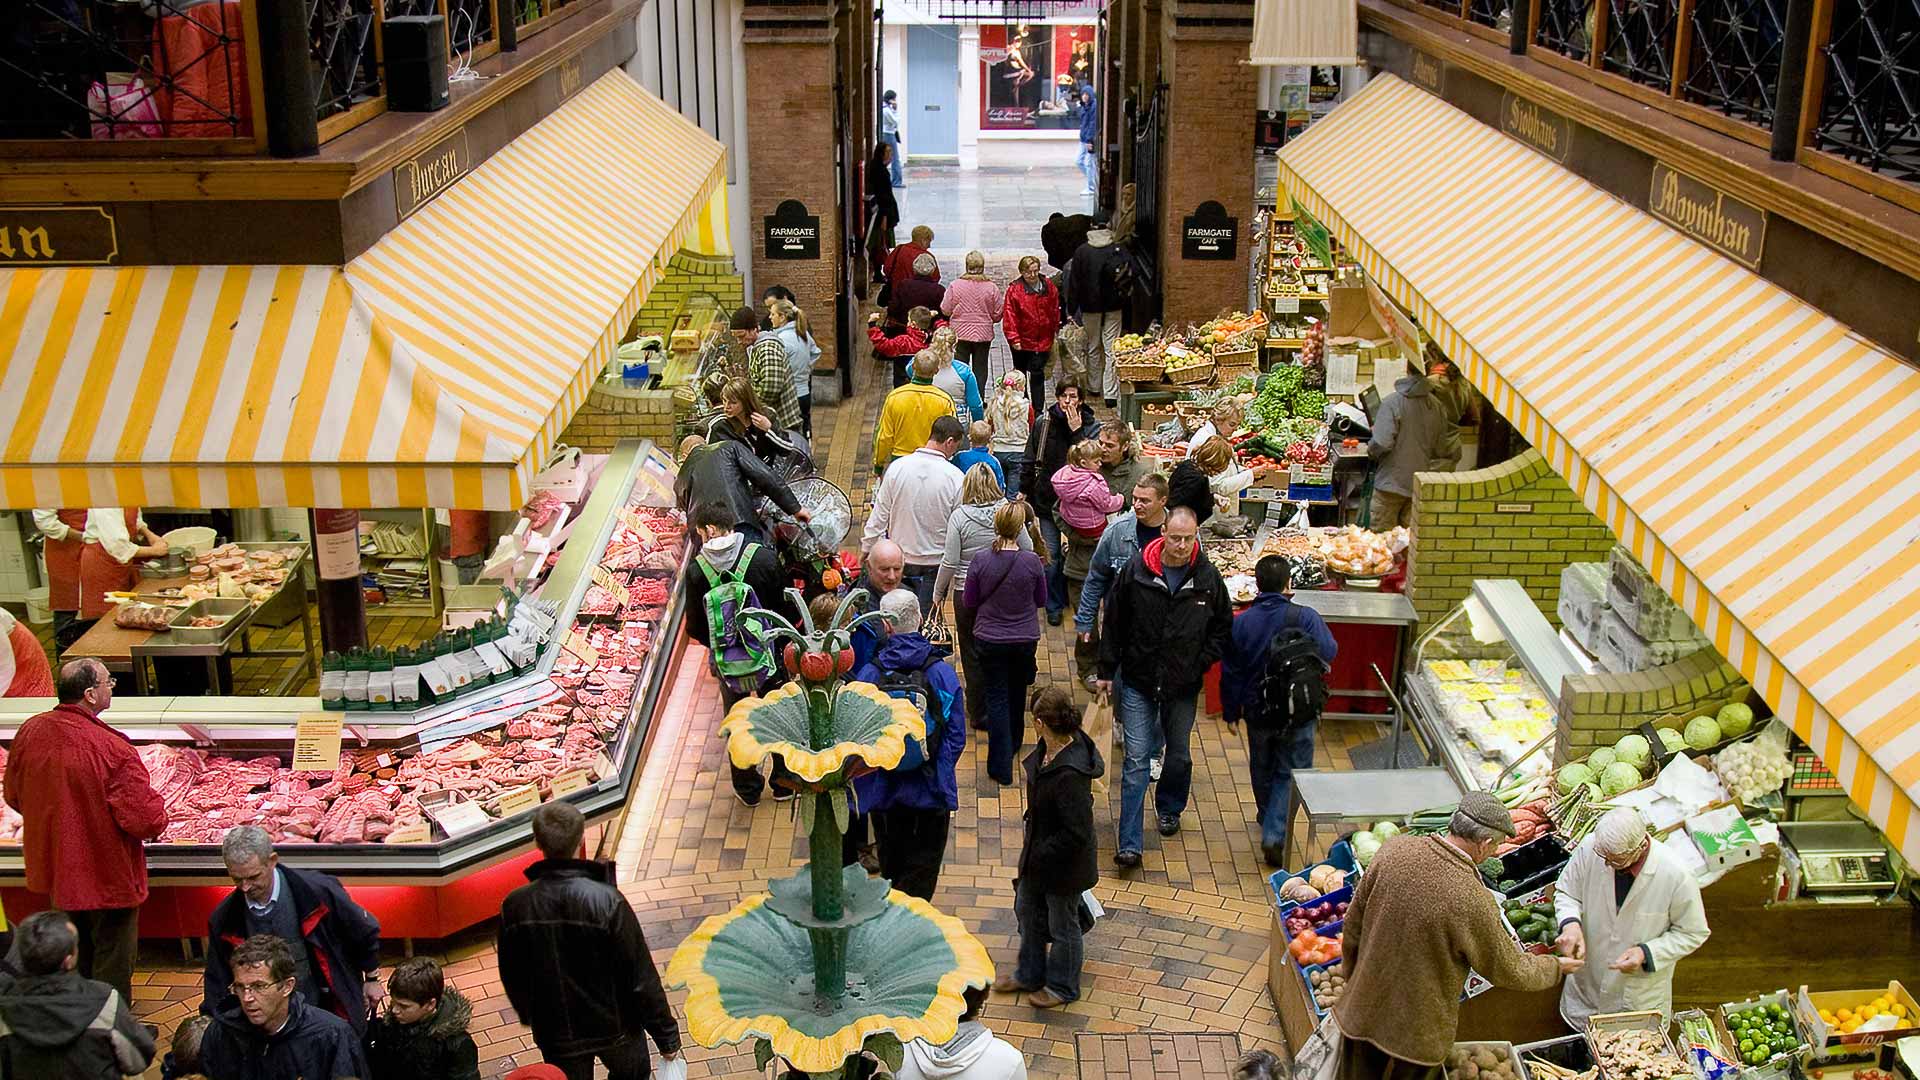 View from above of people shopping in the English Market in Cork